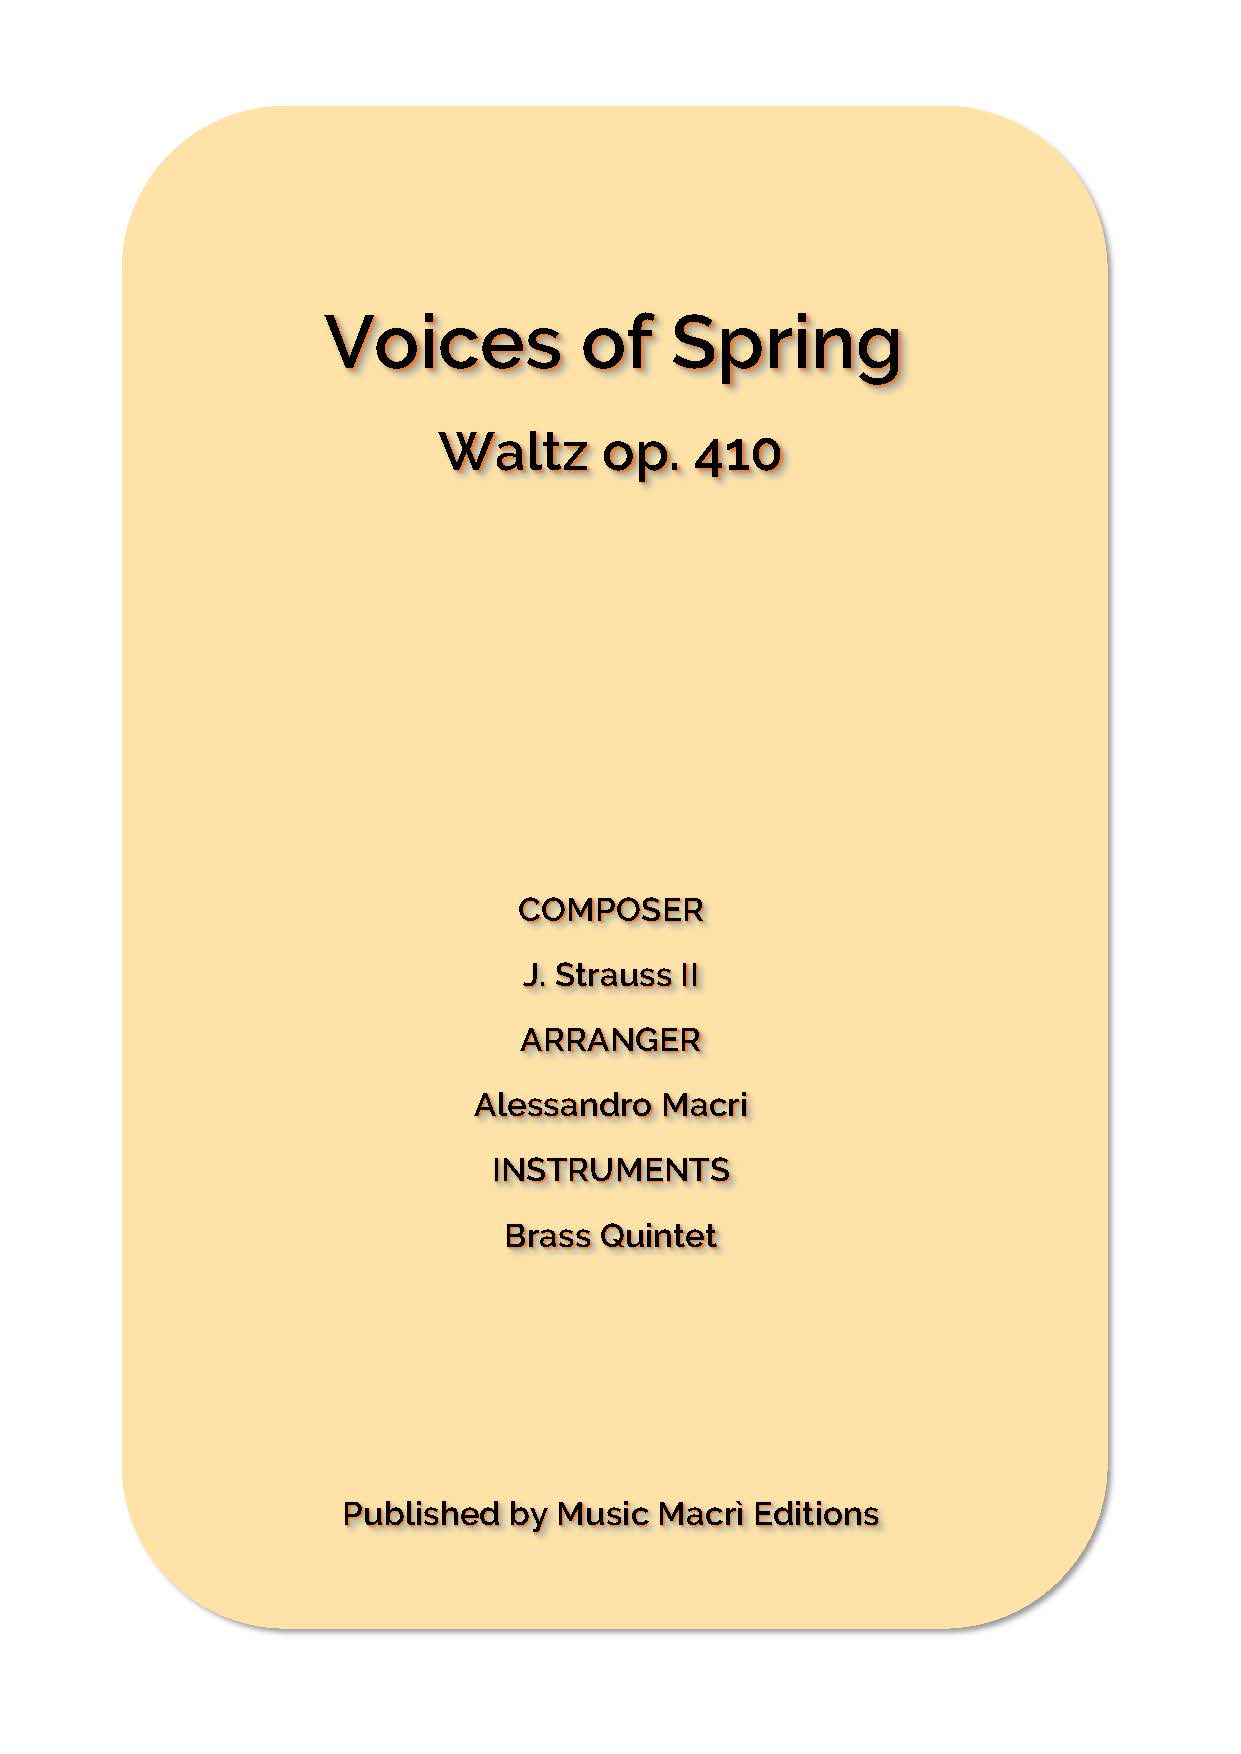 Voices of Spring Waltz Strauss Completo Pagina 01